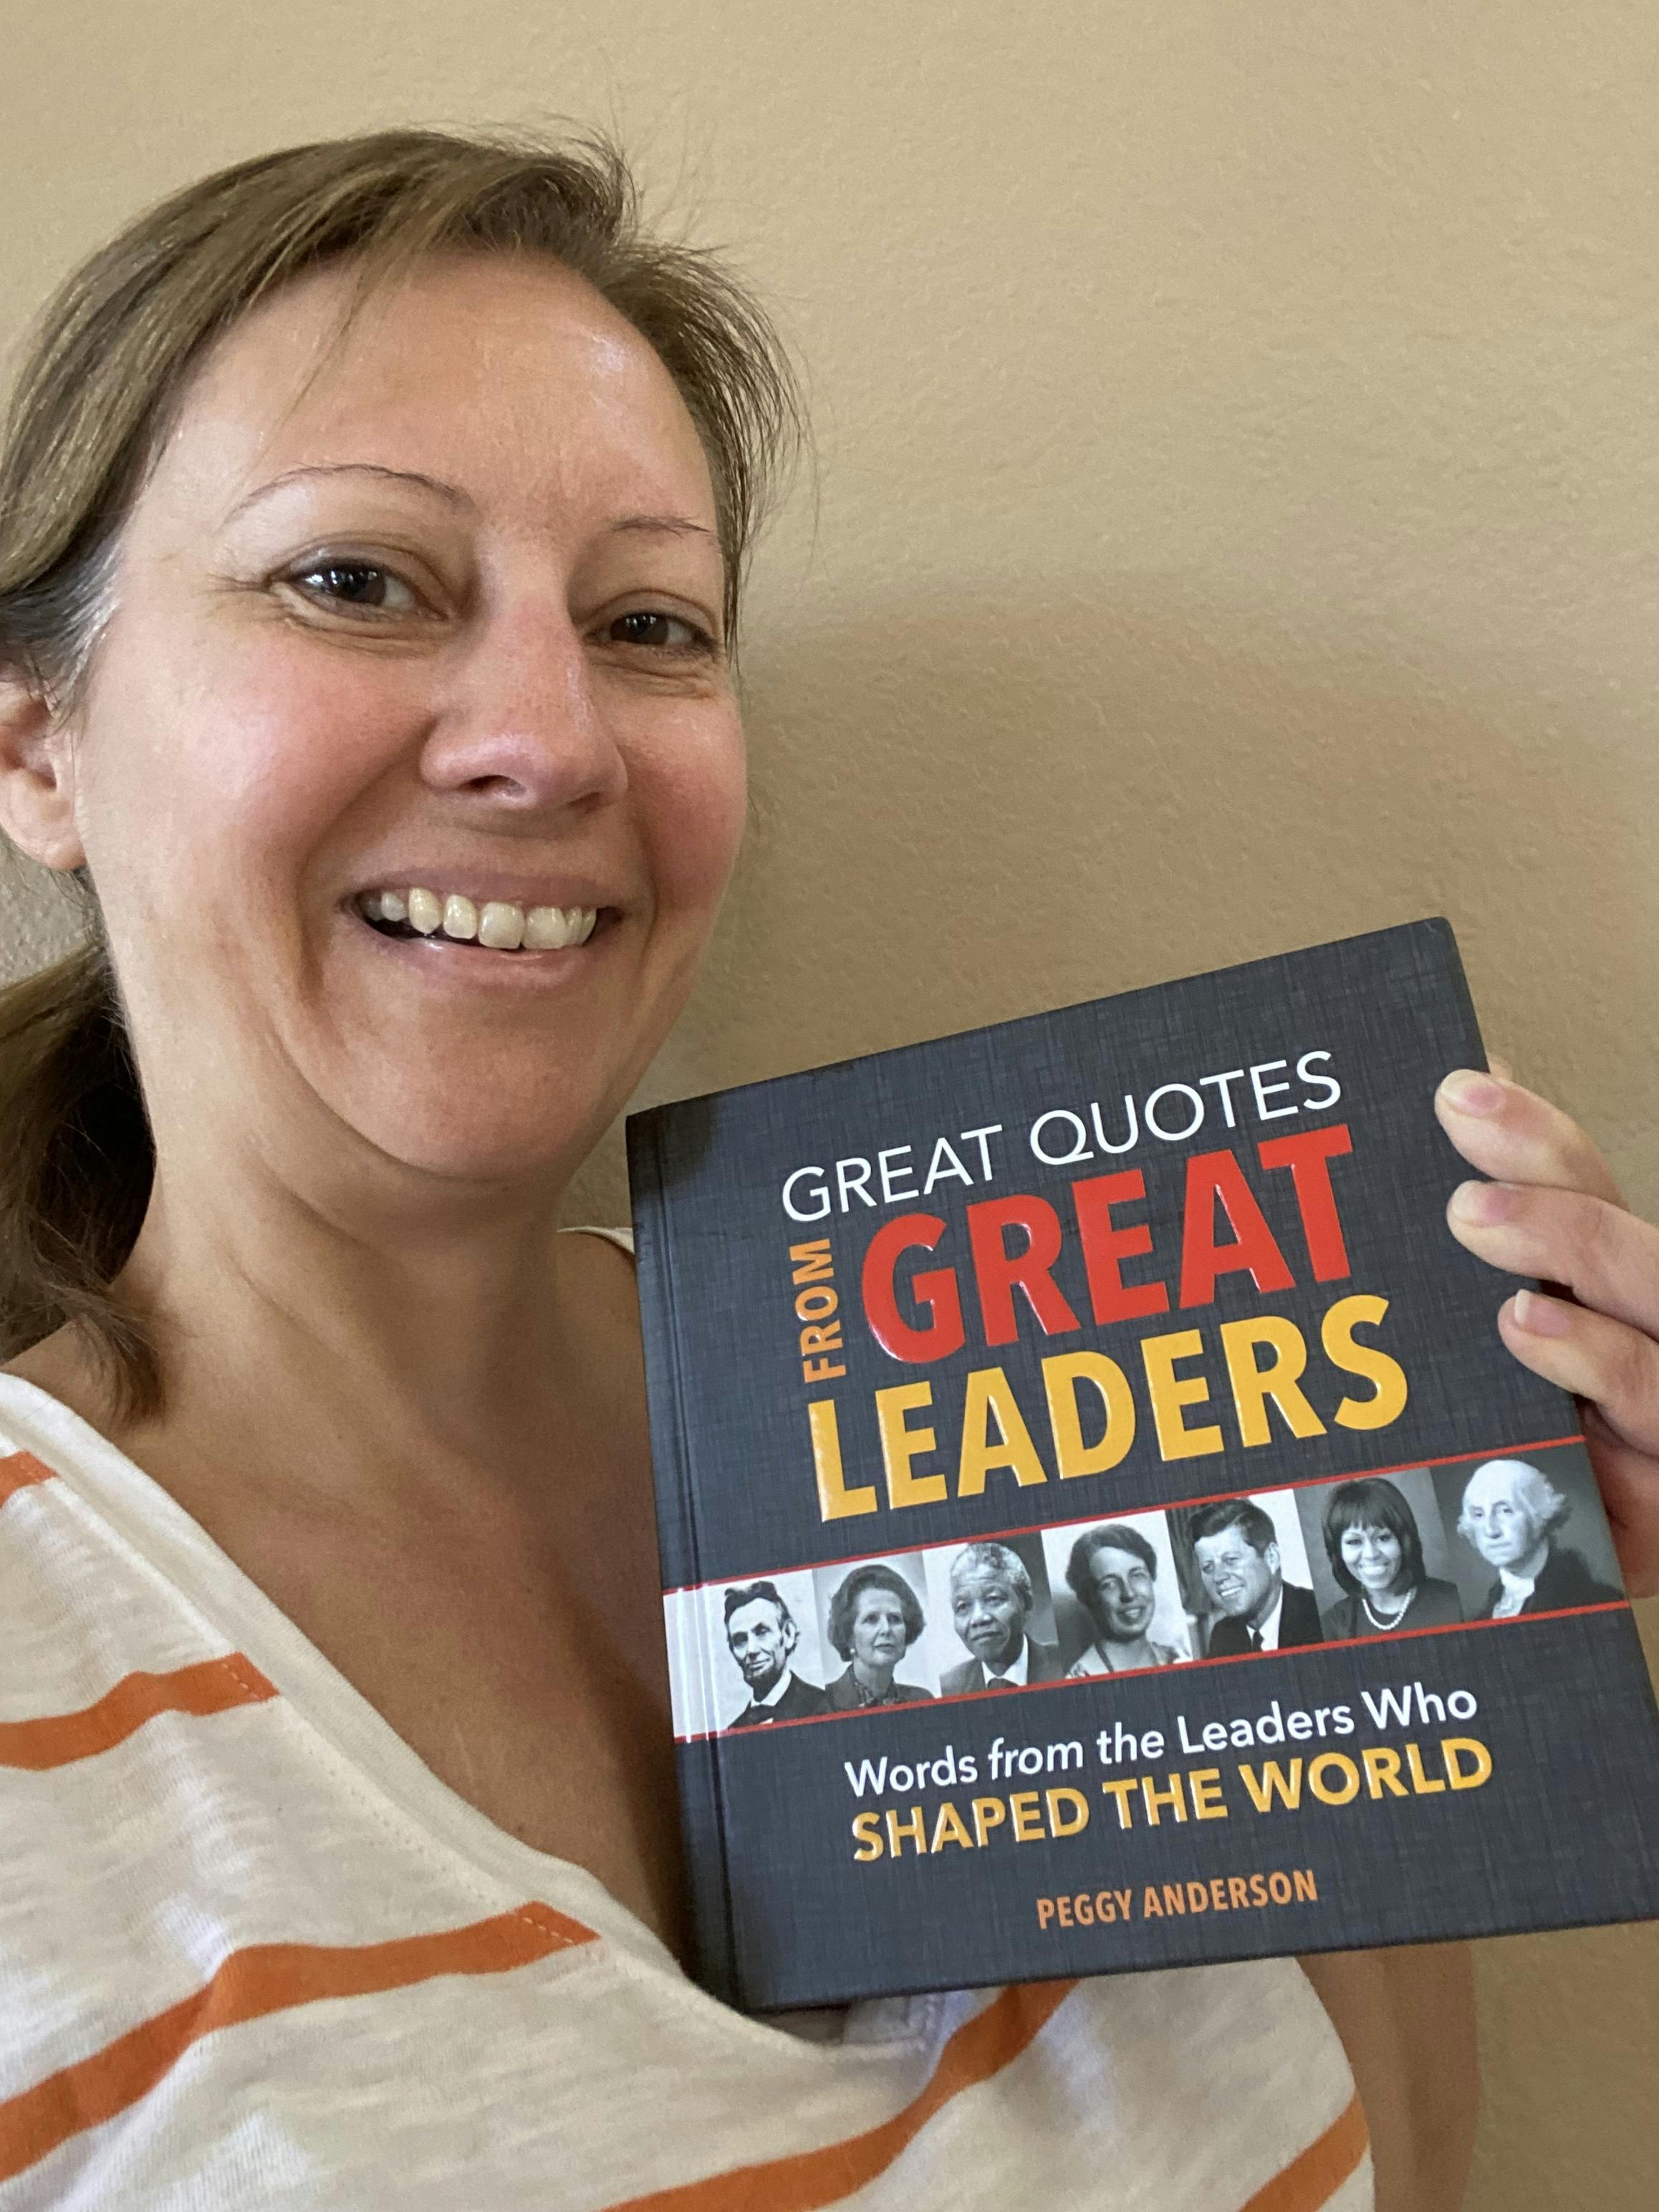 Stephanie holding up the book "Great Quotes From Great Leaders" by Peggy Anderson 